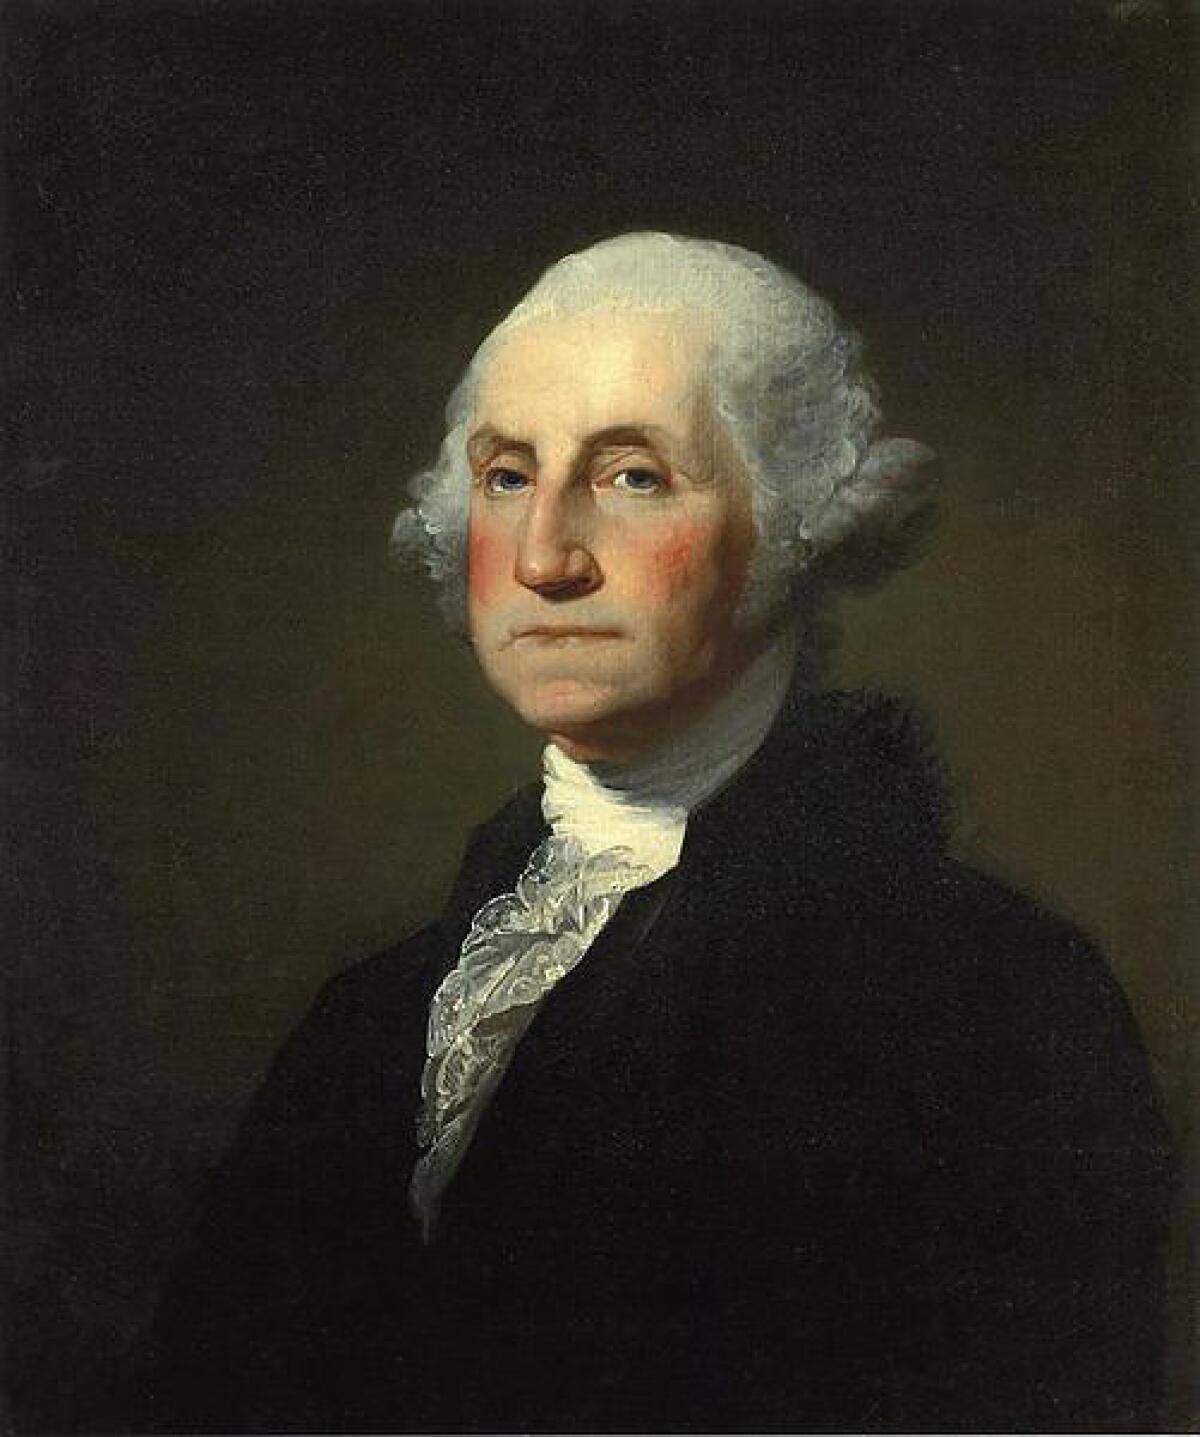 Portrait of the United States' first president George Washington. It is located at Sterling and Francine Clark Art Institute, Williamstown.